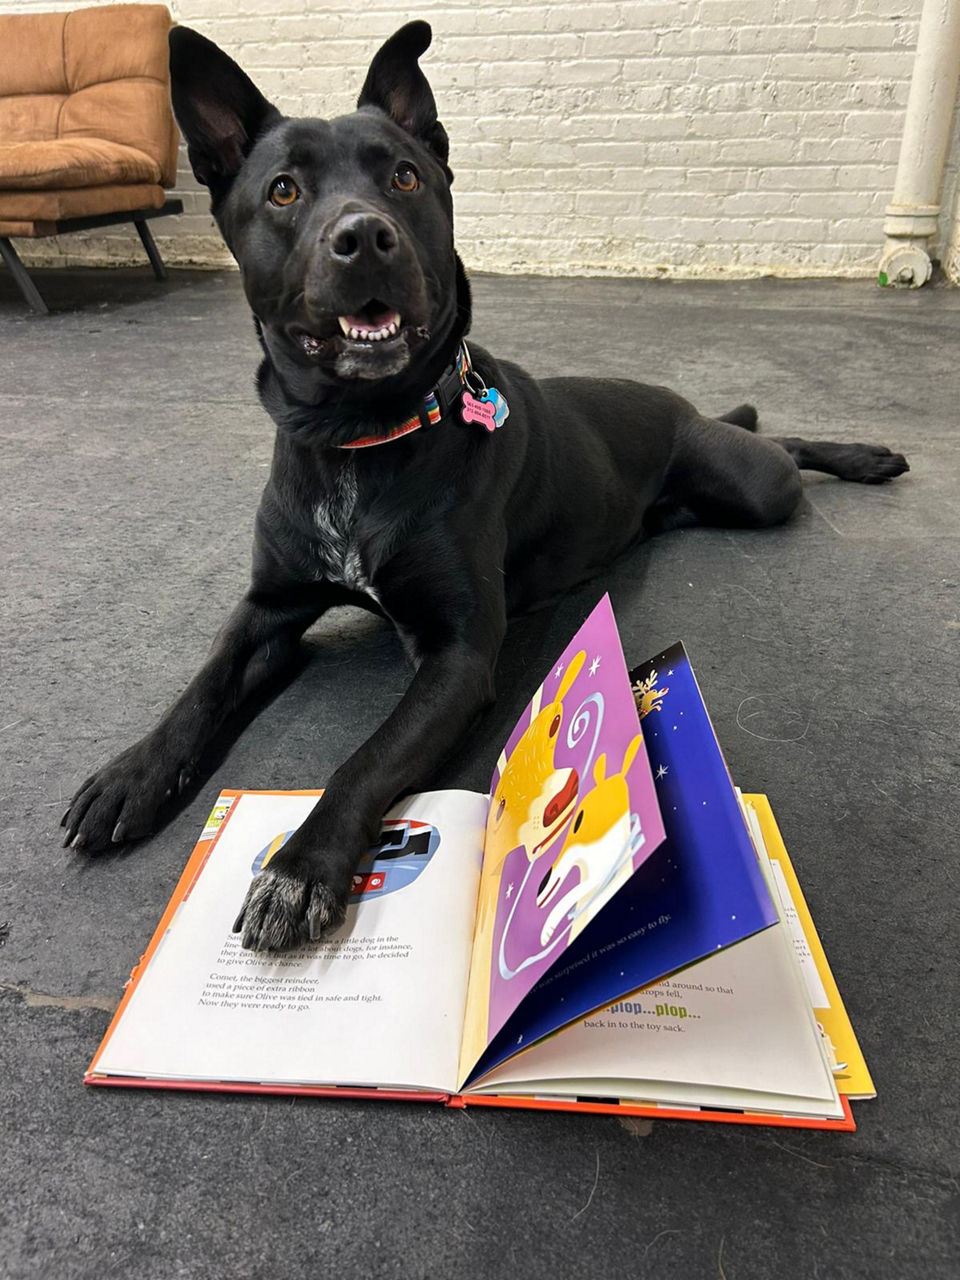 Black dog with book